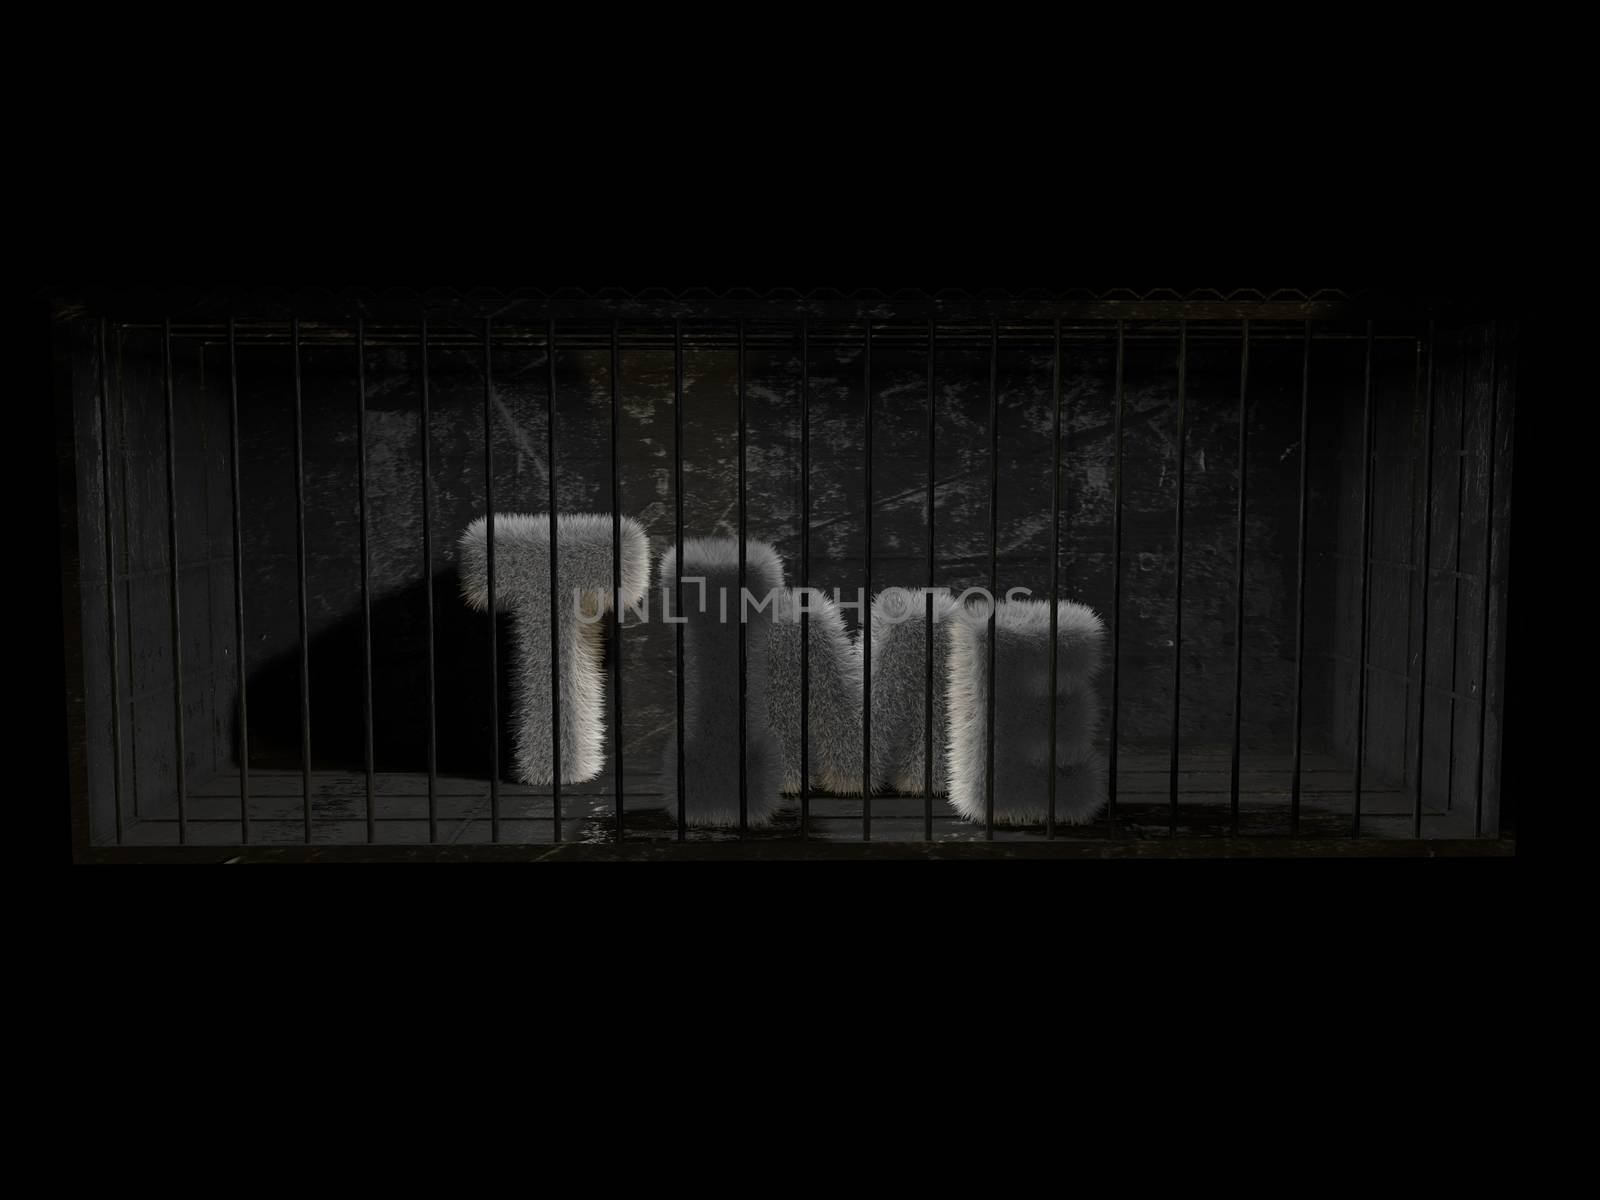 3D time word inside a prison by fares139